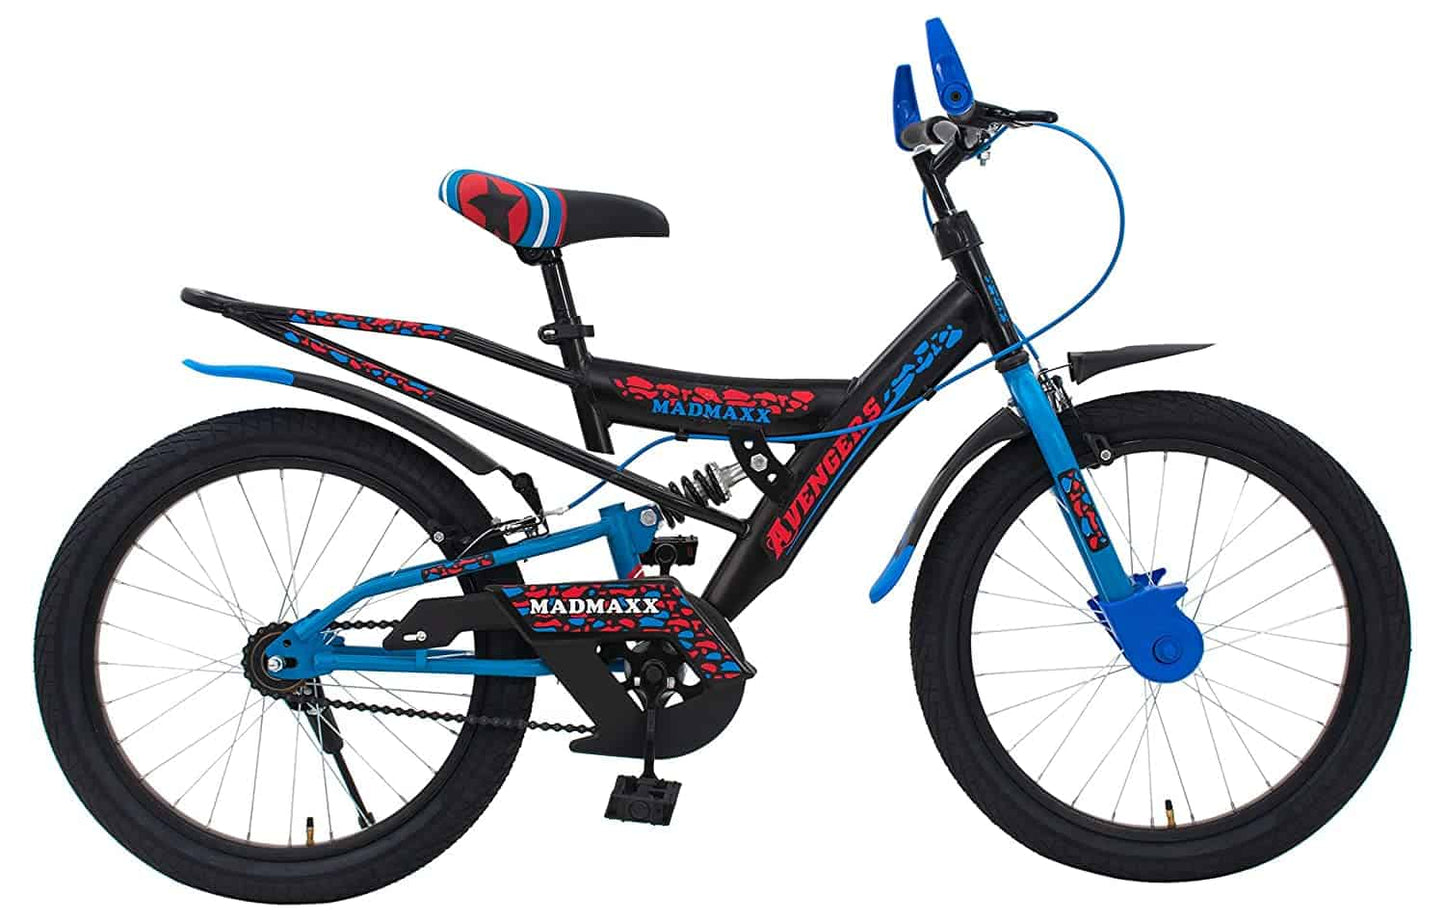 BIKES Shocker Avenger 20T Kid's Road Cycle, 20 inches Matte Finish Black Green/HM Blue for 7 to 10 Years Child